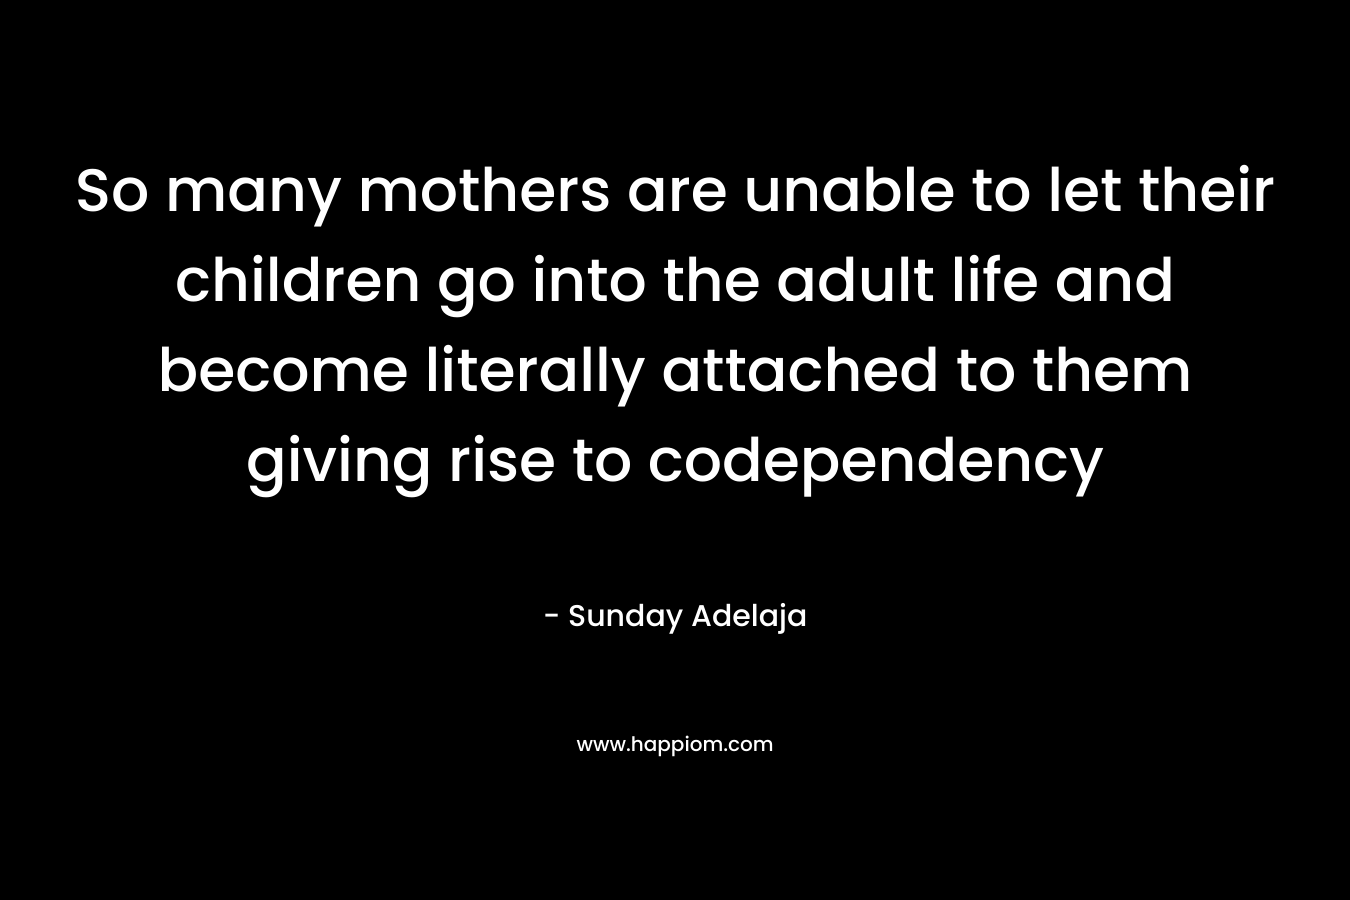 So many mothers are unable to let their children go into the adult life and become literally attached to them giving rise to codependency